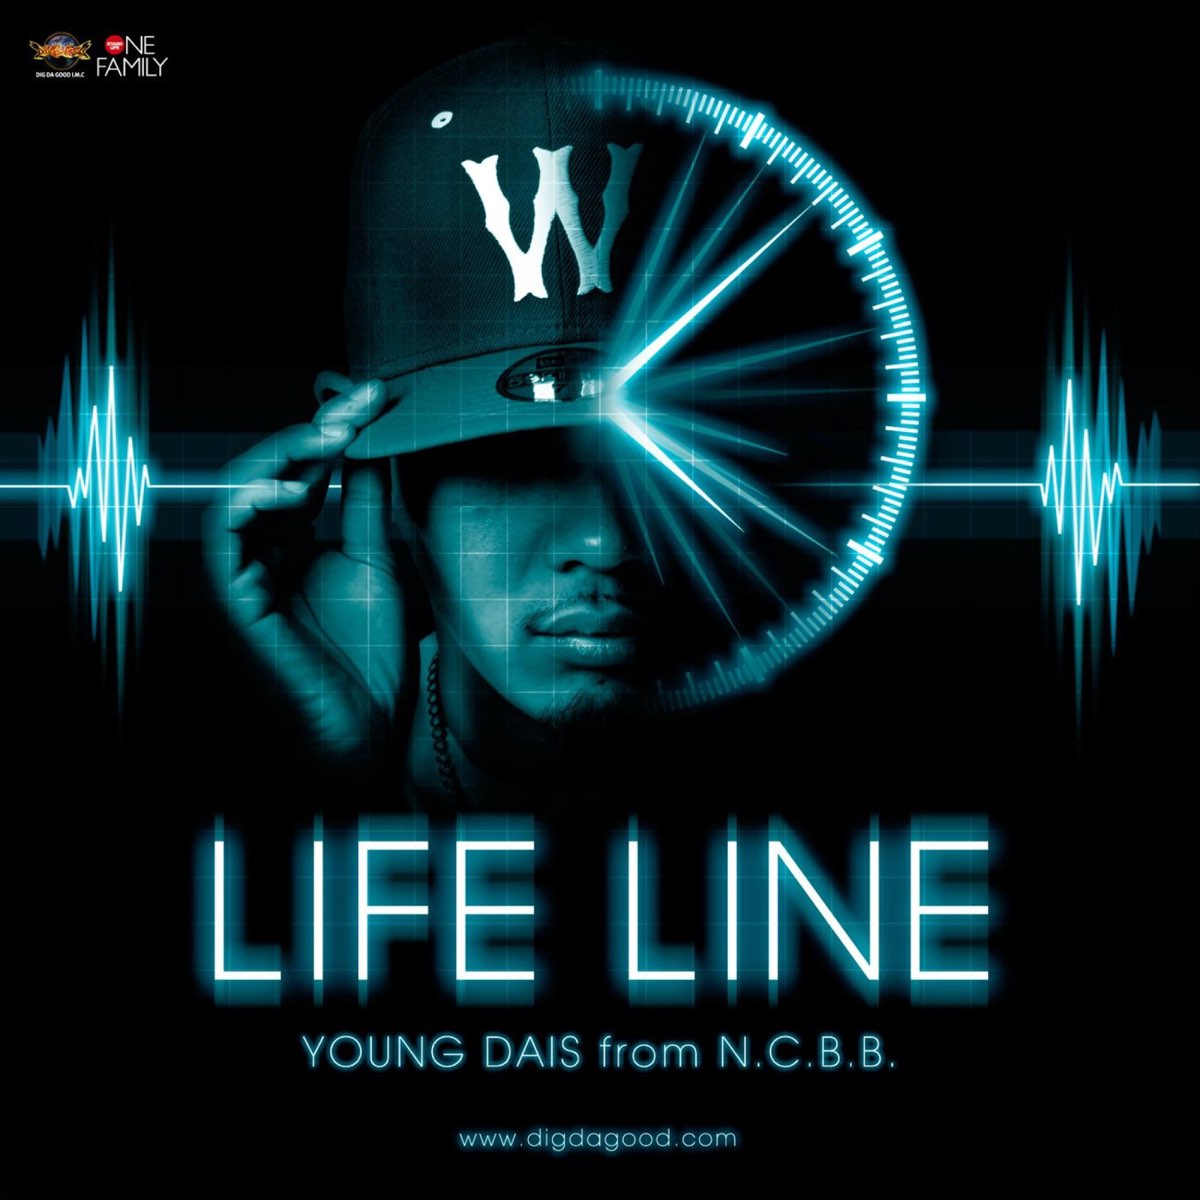 Life is line. The Life of lines. Lifeline. Life ob the line.